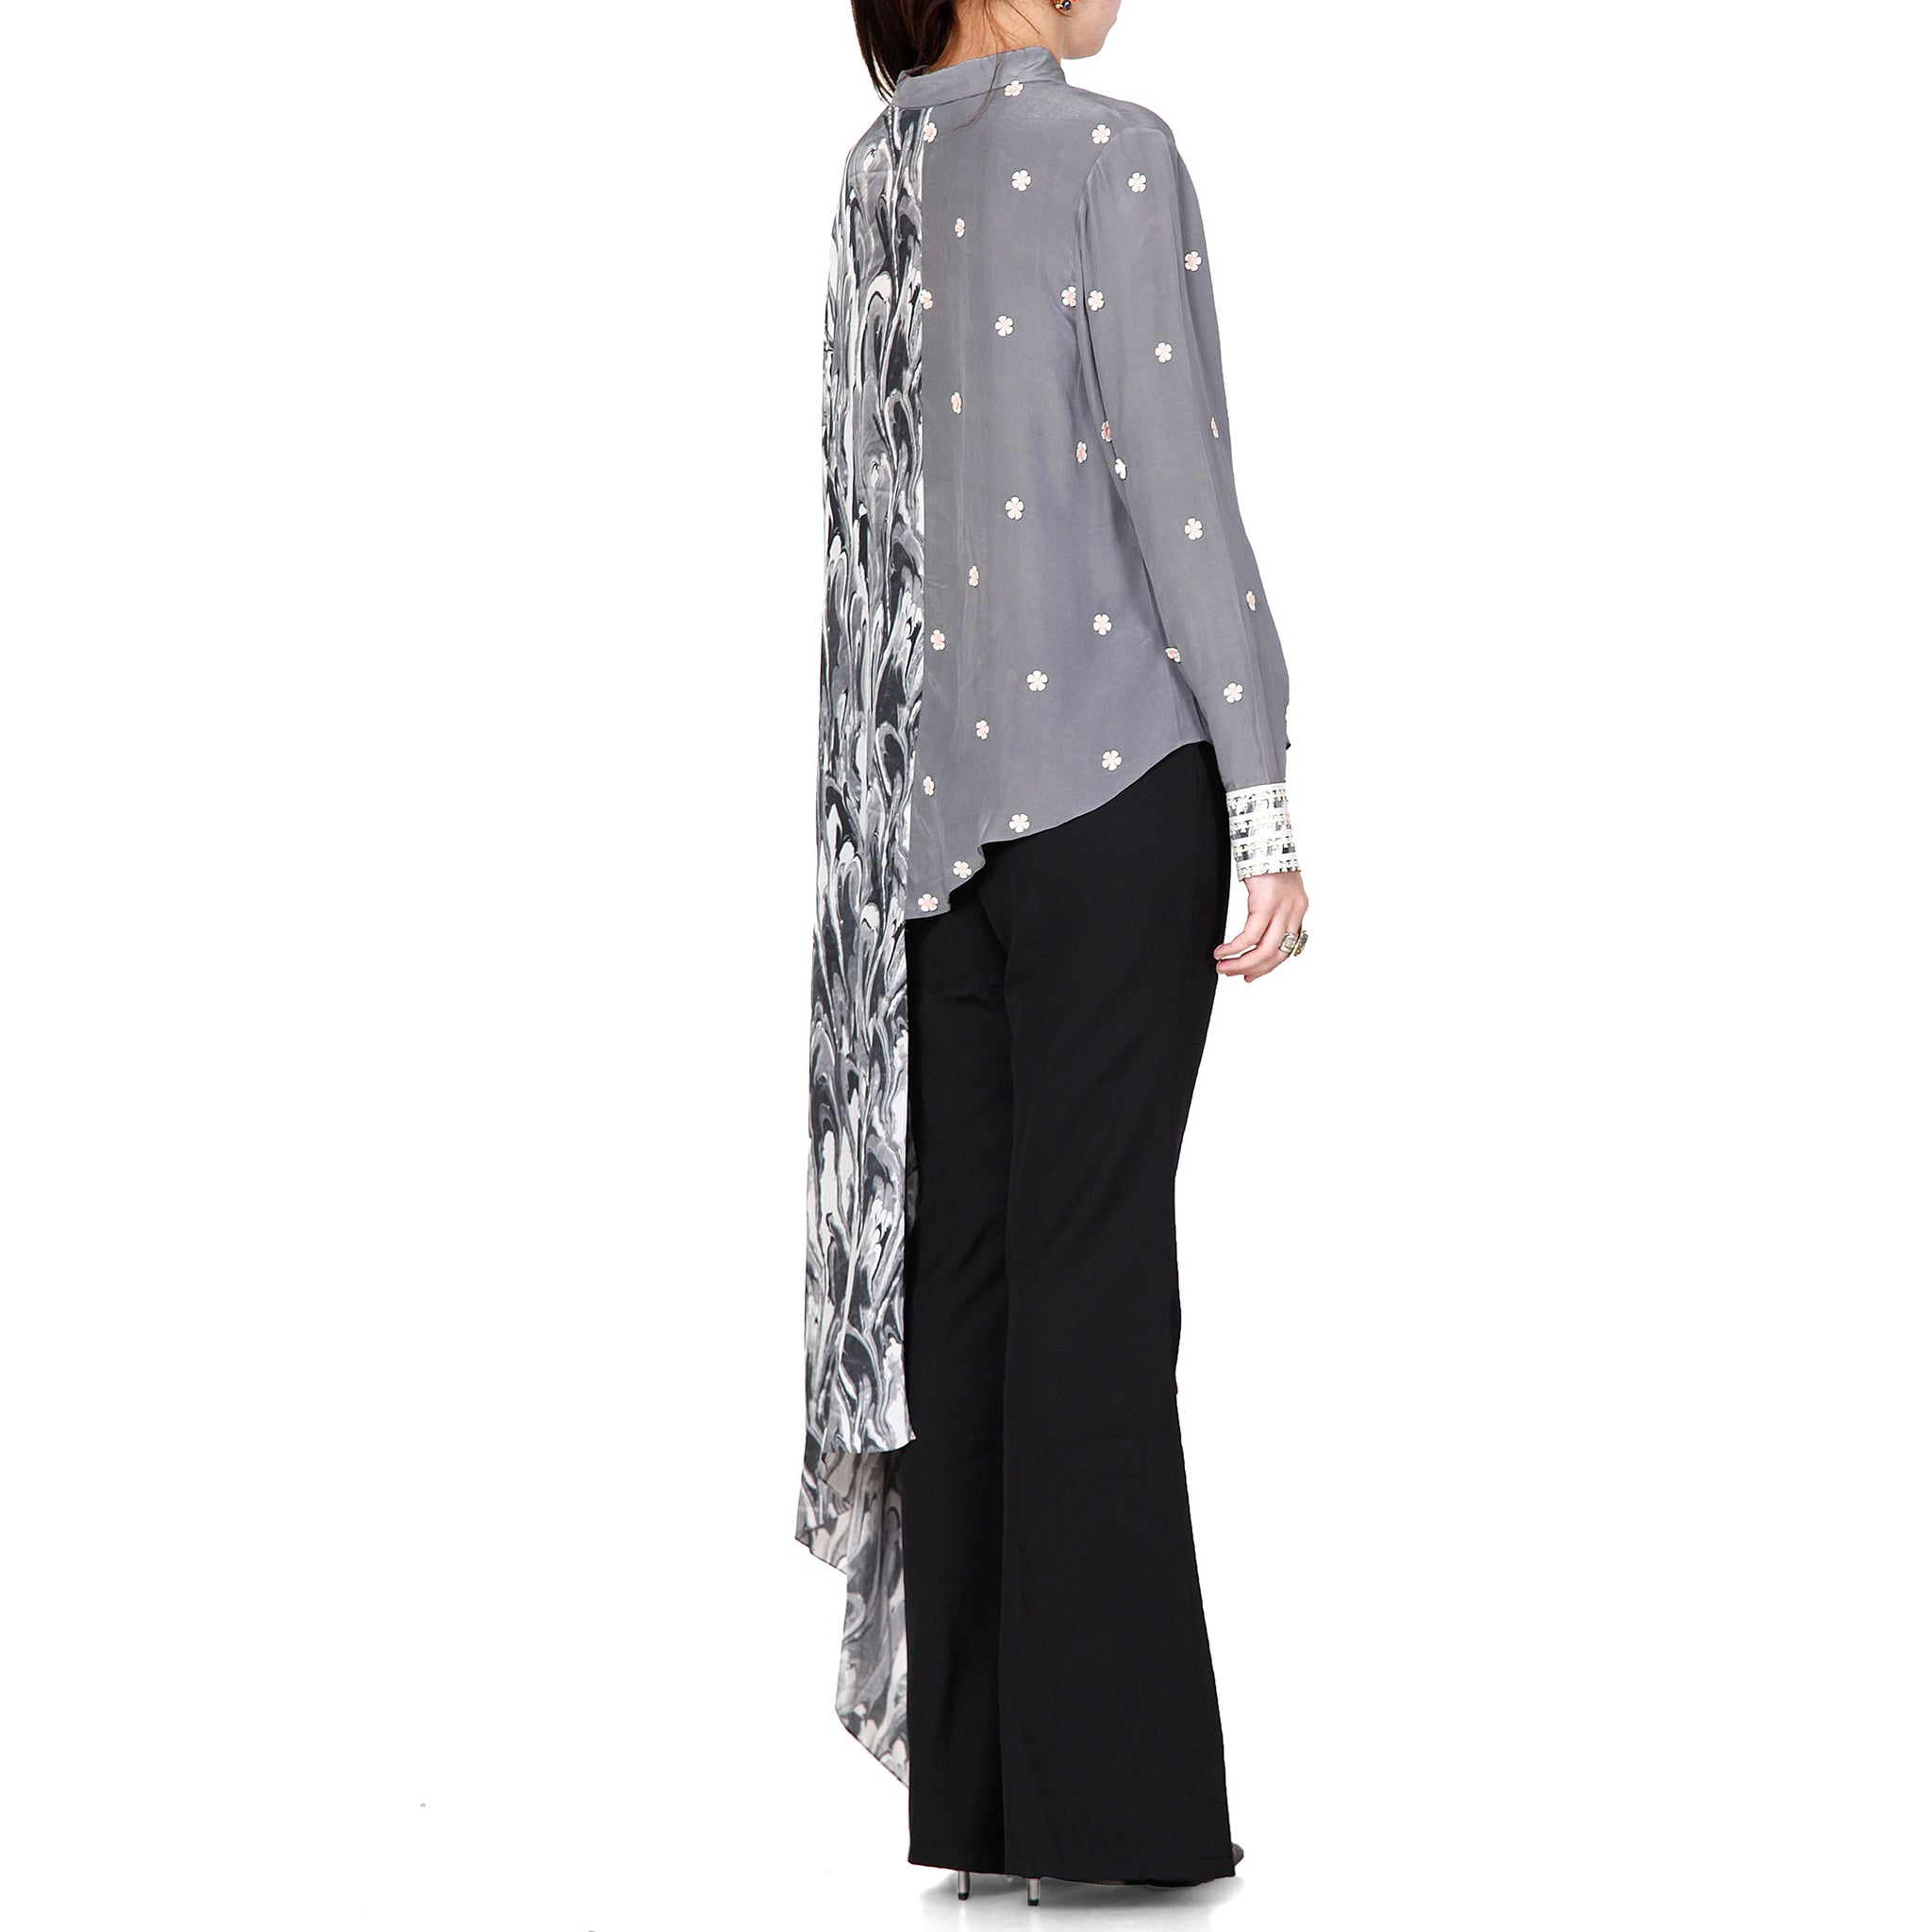 Embroidered Draped Shirt